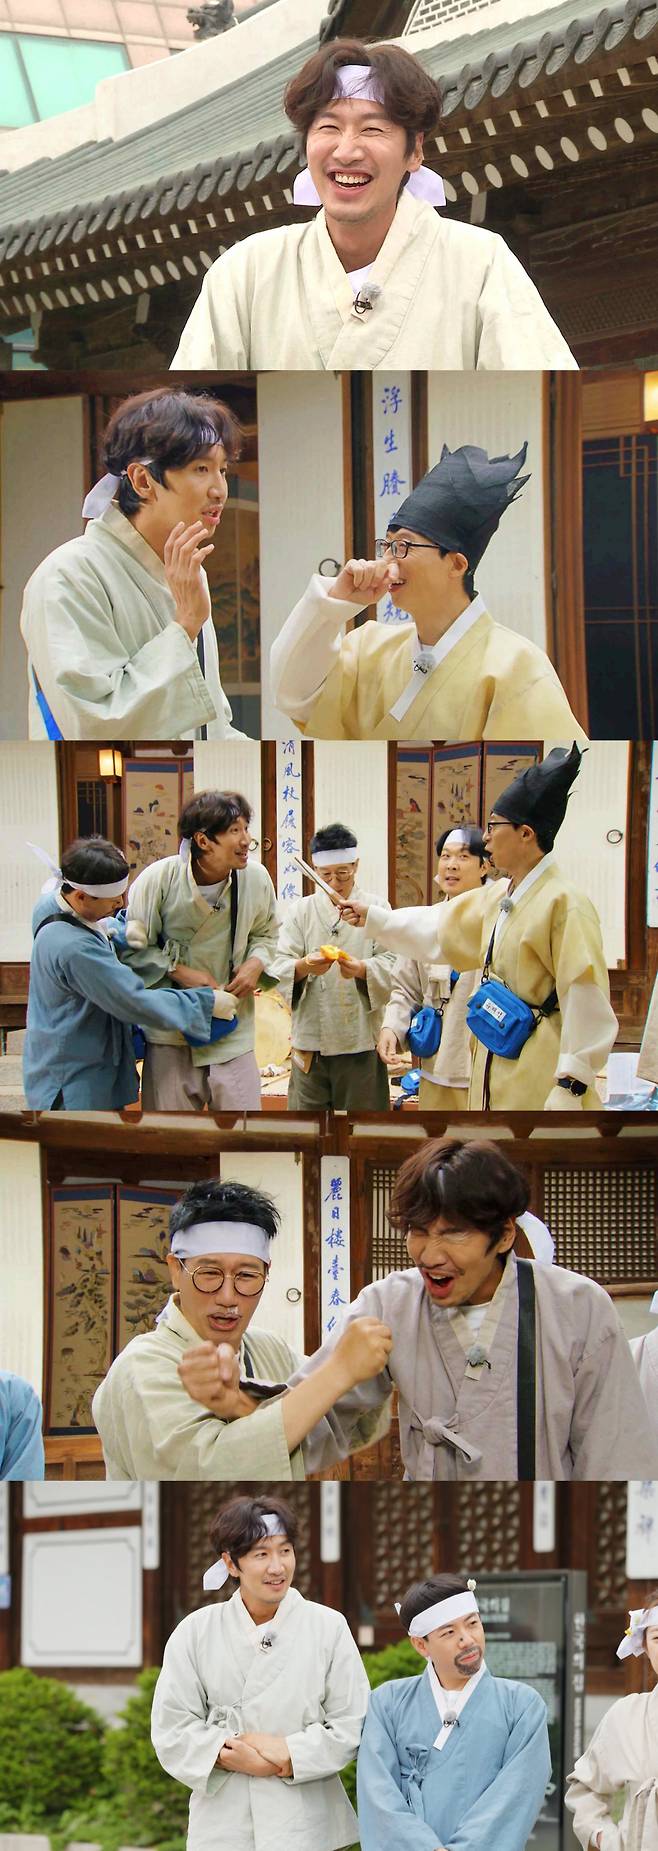 On SBS Running Man, which will be broadcasted on the 6th, Lee Kwang-soo and members will be separated from each other.The first members who met after the Lee Kwang-soo departure article on the broadcast last week told Lee Kwang-soo as soon as the filming began, I get off., started the Lee Kwang-soo teasing.The members were shown to the second row related to the departure of Ha: If you recruit a member, Cha: Cha Eun-woo, Cha Tae-hyun and made the scene laugh.What will the last dinner be? He said, delightfully dissolving Lee Kwang-soos departure news with Running Man Style .Following last week, the members of this week will constantly mention getting off and Lee Kwang-soos era of suffering will continue.On this day, the members who turned into a head of the head are serving three meals to Yoo Jae-Suk. Yoo Jae-Suk opened the opening of the opening ceremony to Lee Kwang-soo, saying, It is a savoie mess.Lee Kwang-soos betrayal also ran on the day, and Lee Kwang-soo was caught trying to get other deer to get more leaflets from Yoo Jae-Suk, and secretly stealing the leaflets to another place.The members said, Where are you going before you go out!On the other hand, Ji Seok-jin, who declared Crying a Cross once a time until he got off, shouted the Cross again and made a fuss.